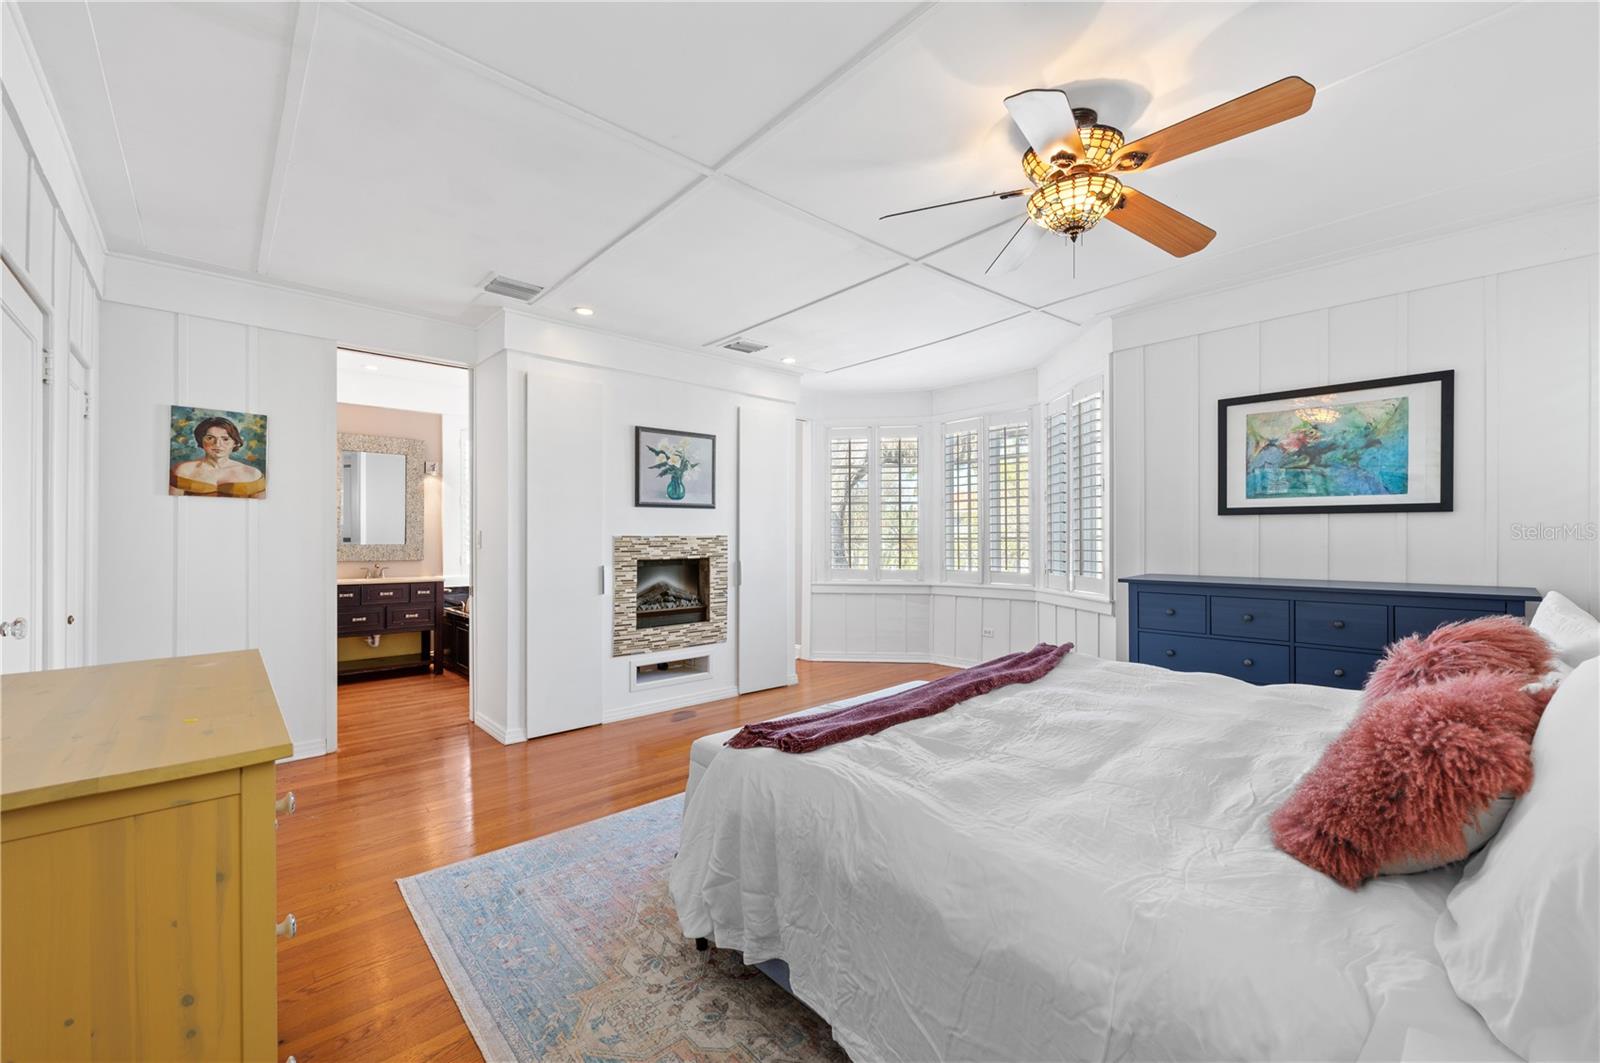 Spacious Master Bedroom with gorgeous detailed woodwork and two-sided fireplace.